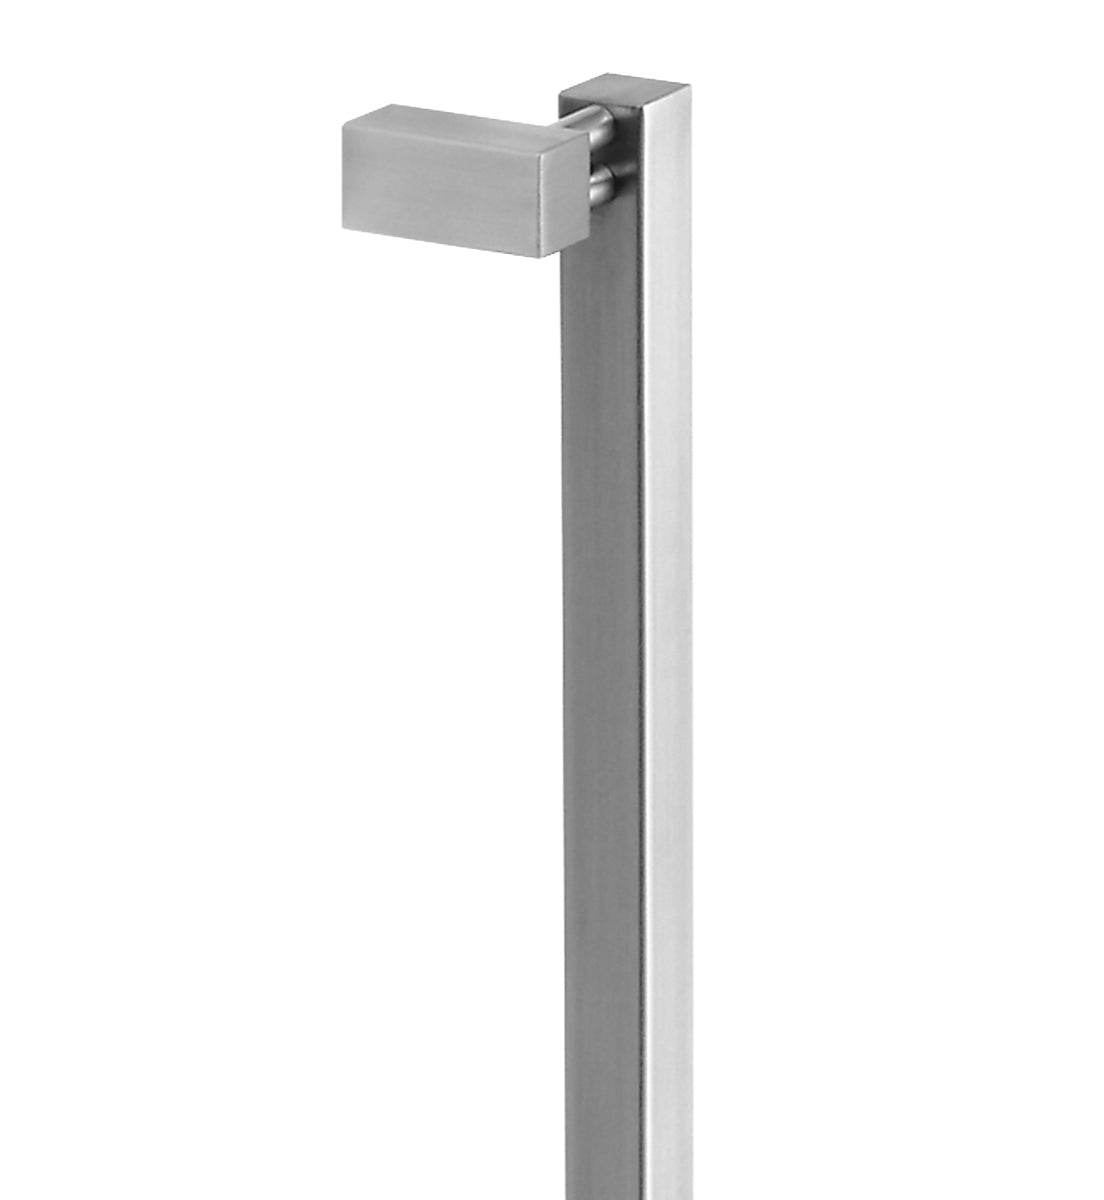 8110 Offset Single Entrance Handle, Rear Disk Fix, 825mm x 25mm, CTC 800mm in Satin Stainless